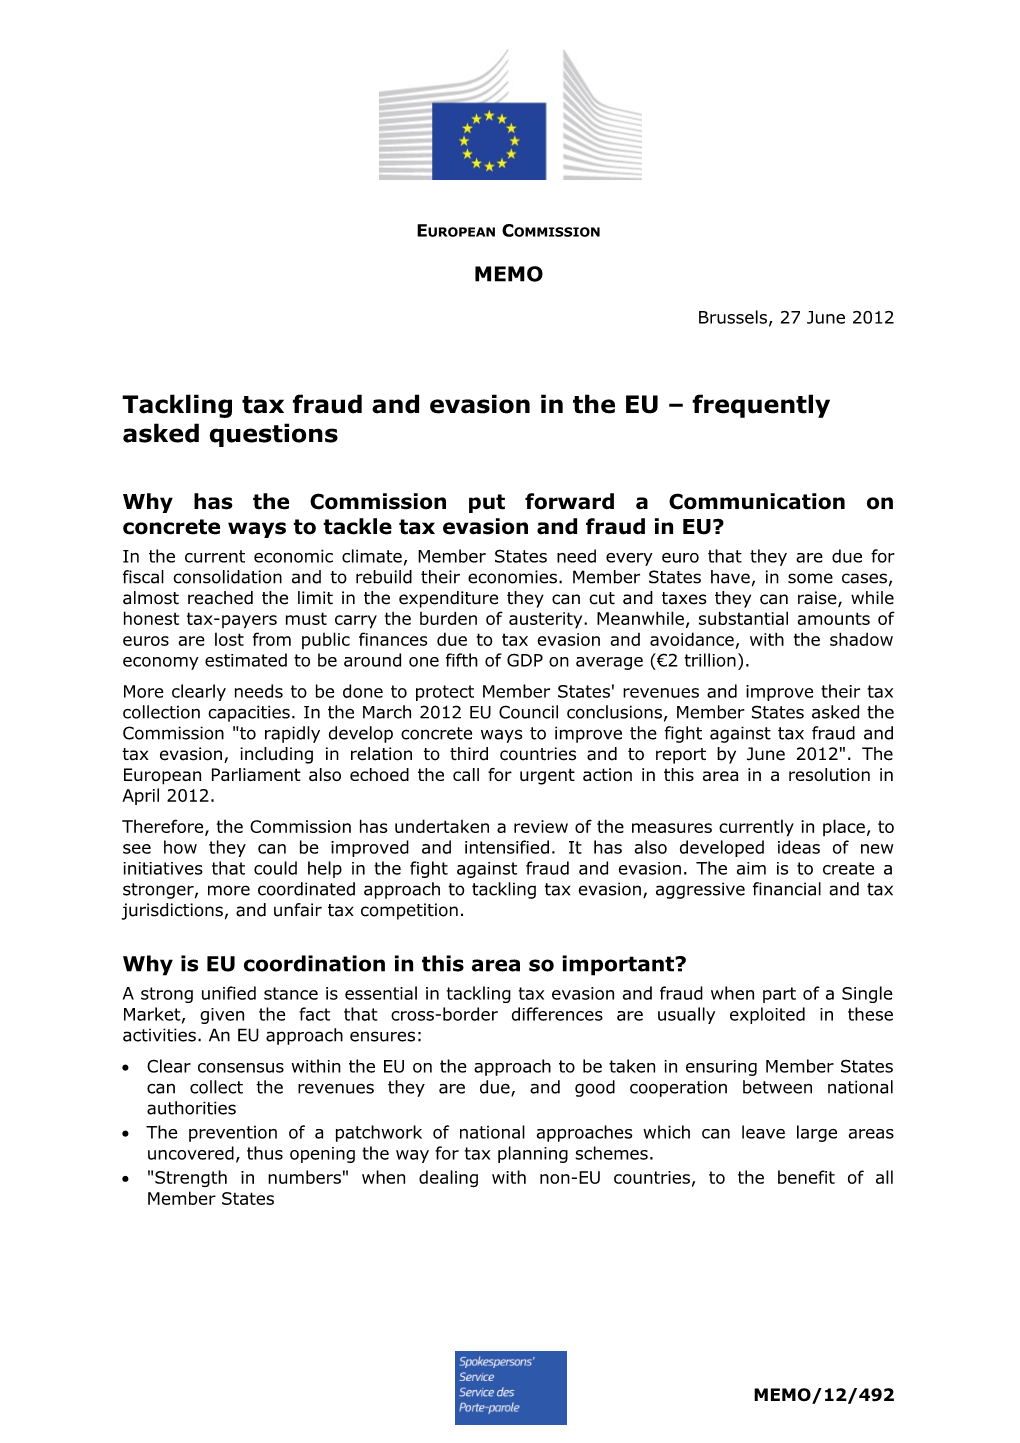 Tackling Tax Fraud and Evasion in the EU Frequently Asked Questions